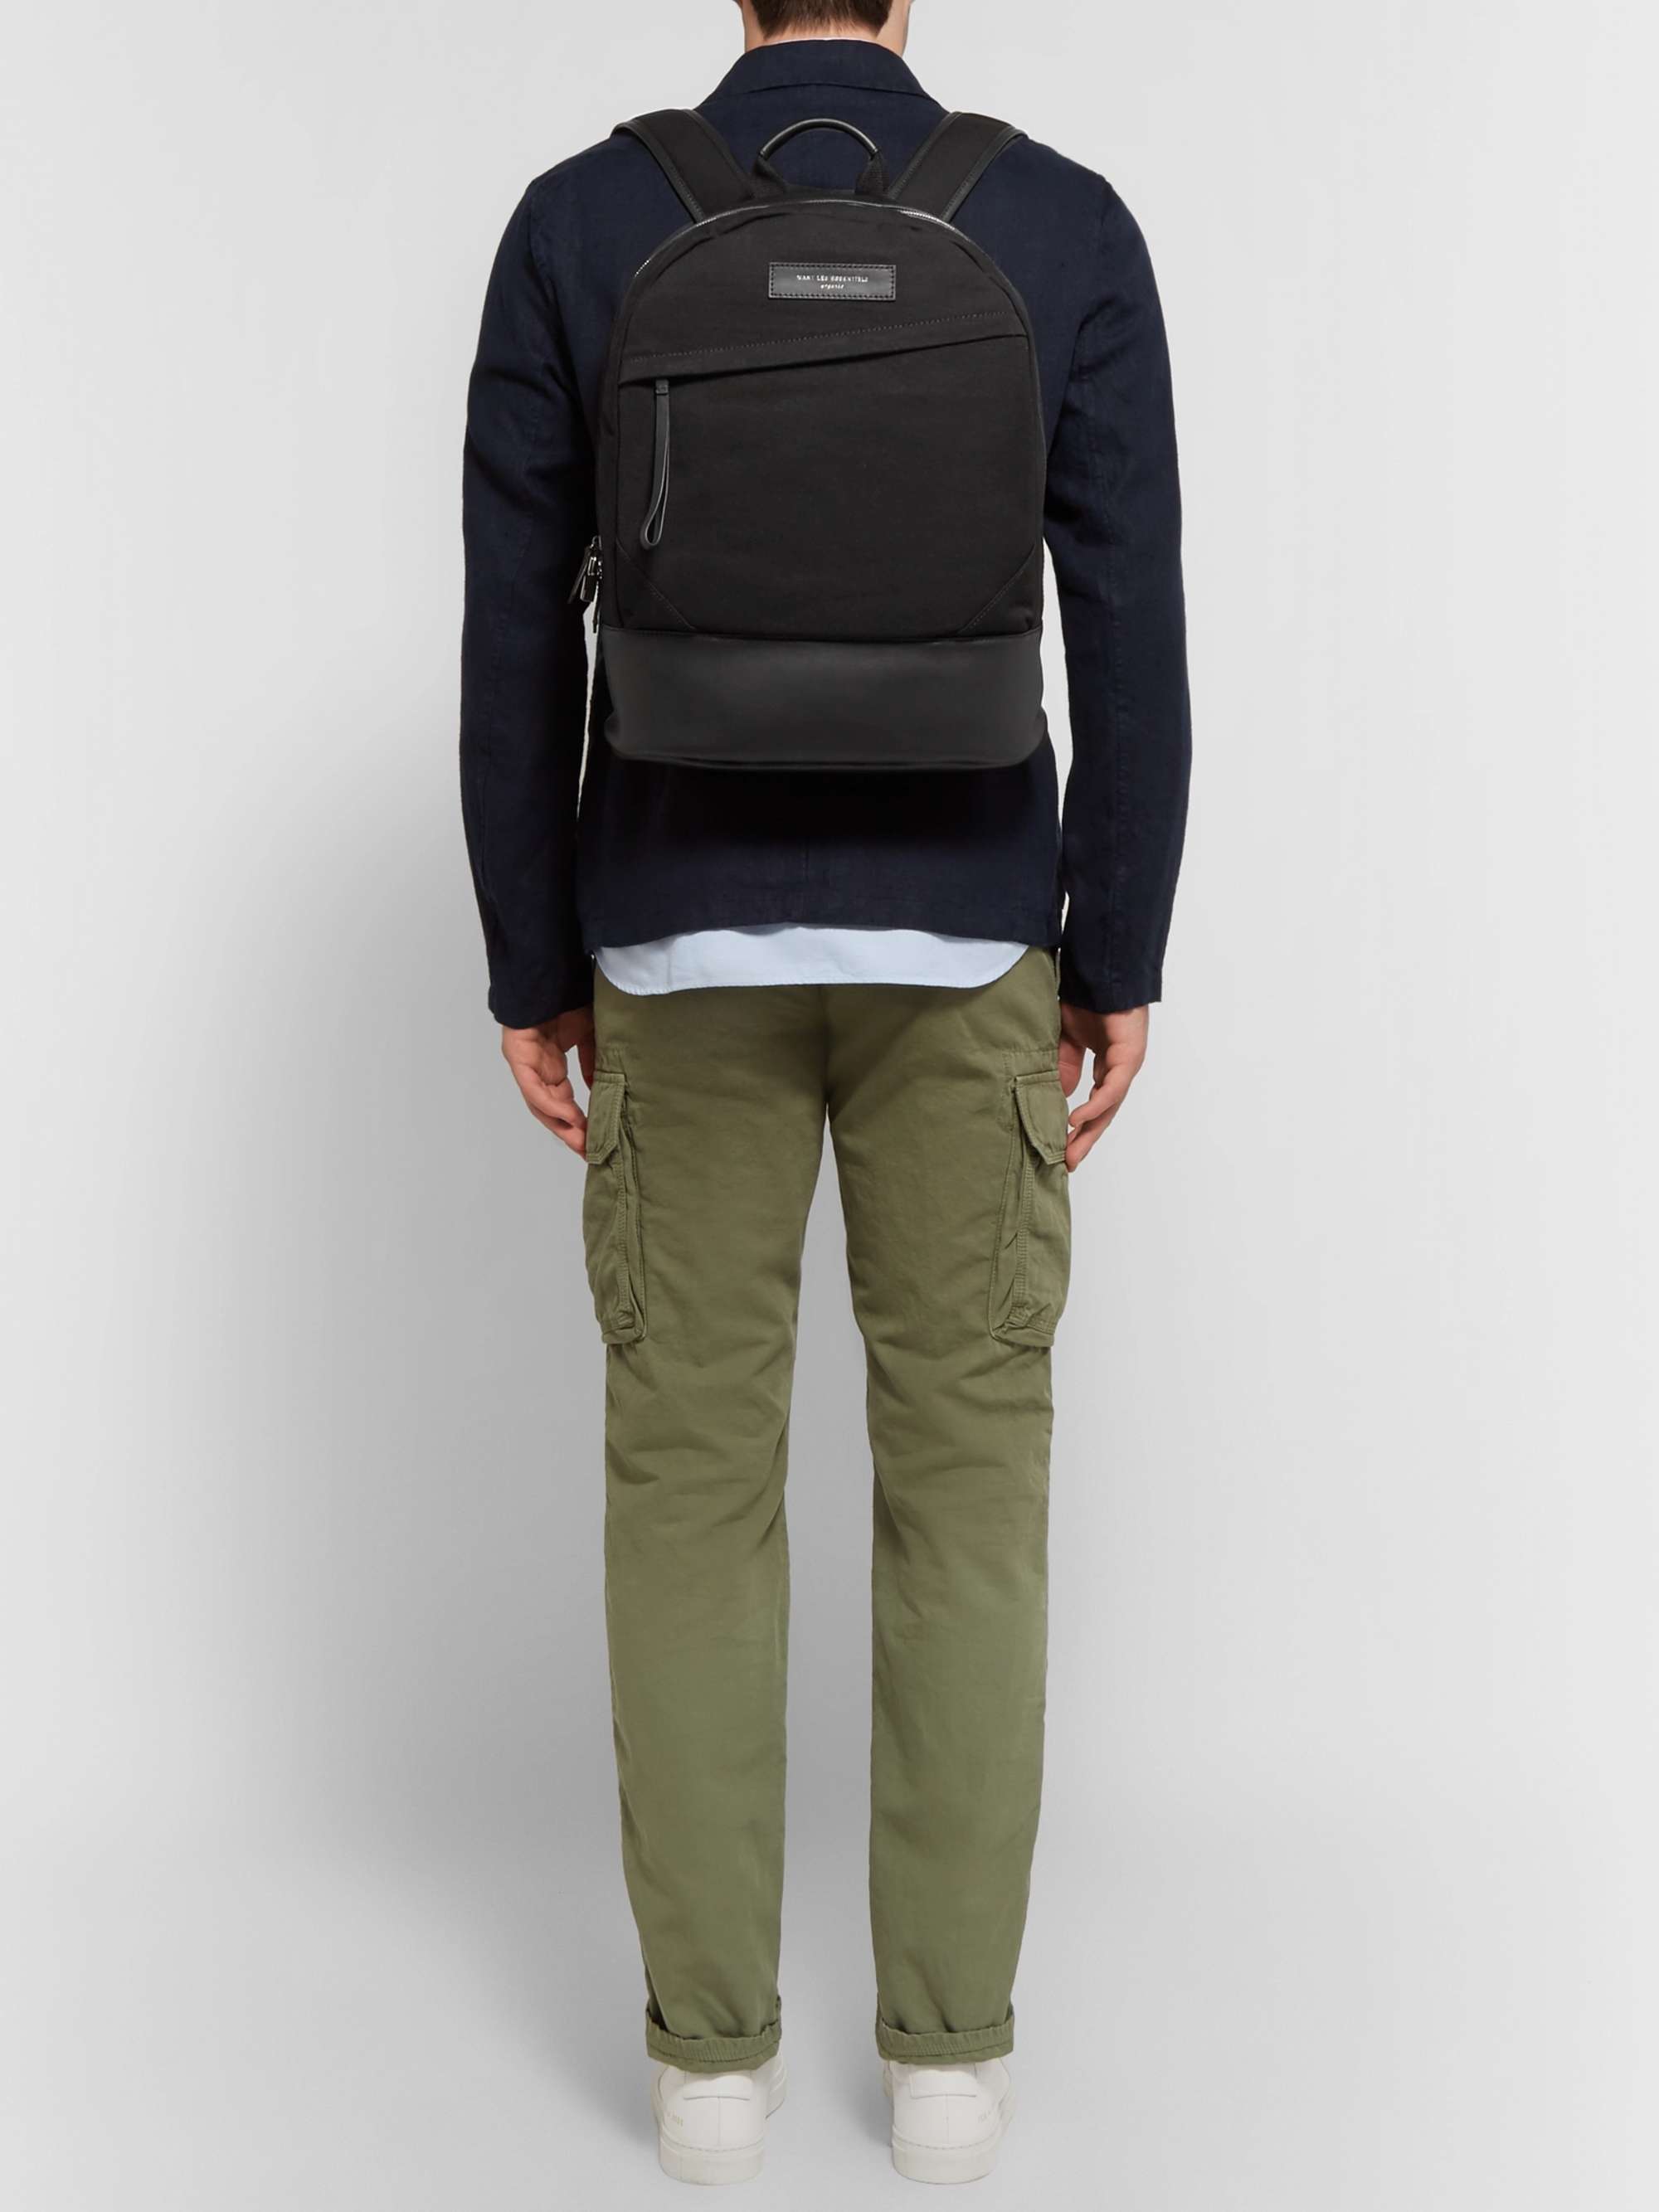 WANT LES ESSENTIELS Kastrup Leather-Trimmed Organic Cotton-Canvas Backpack